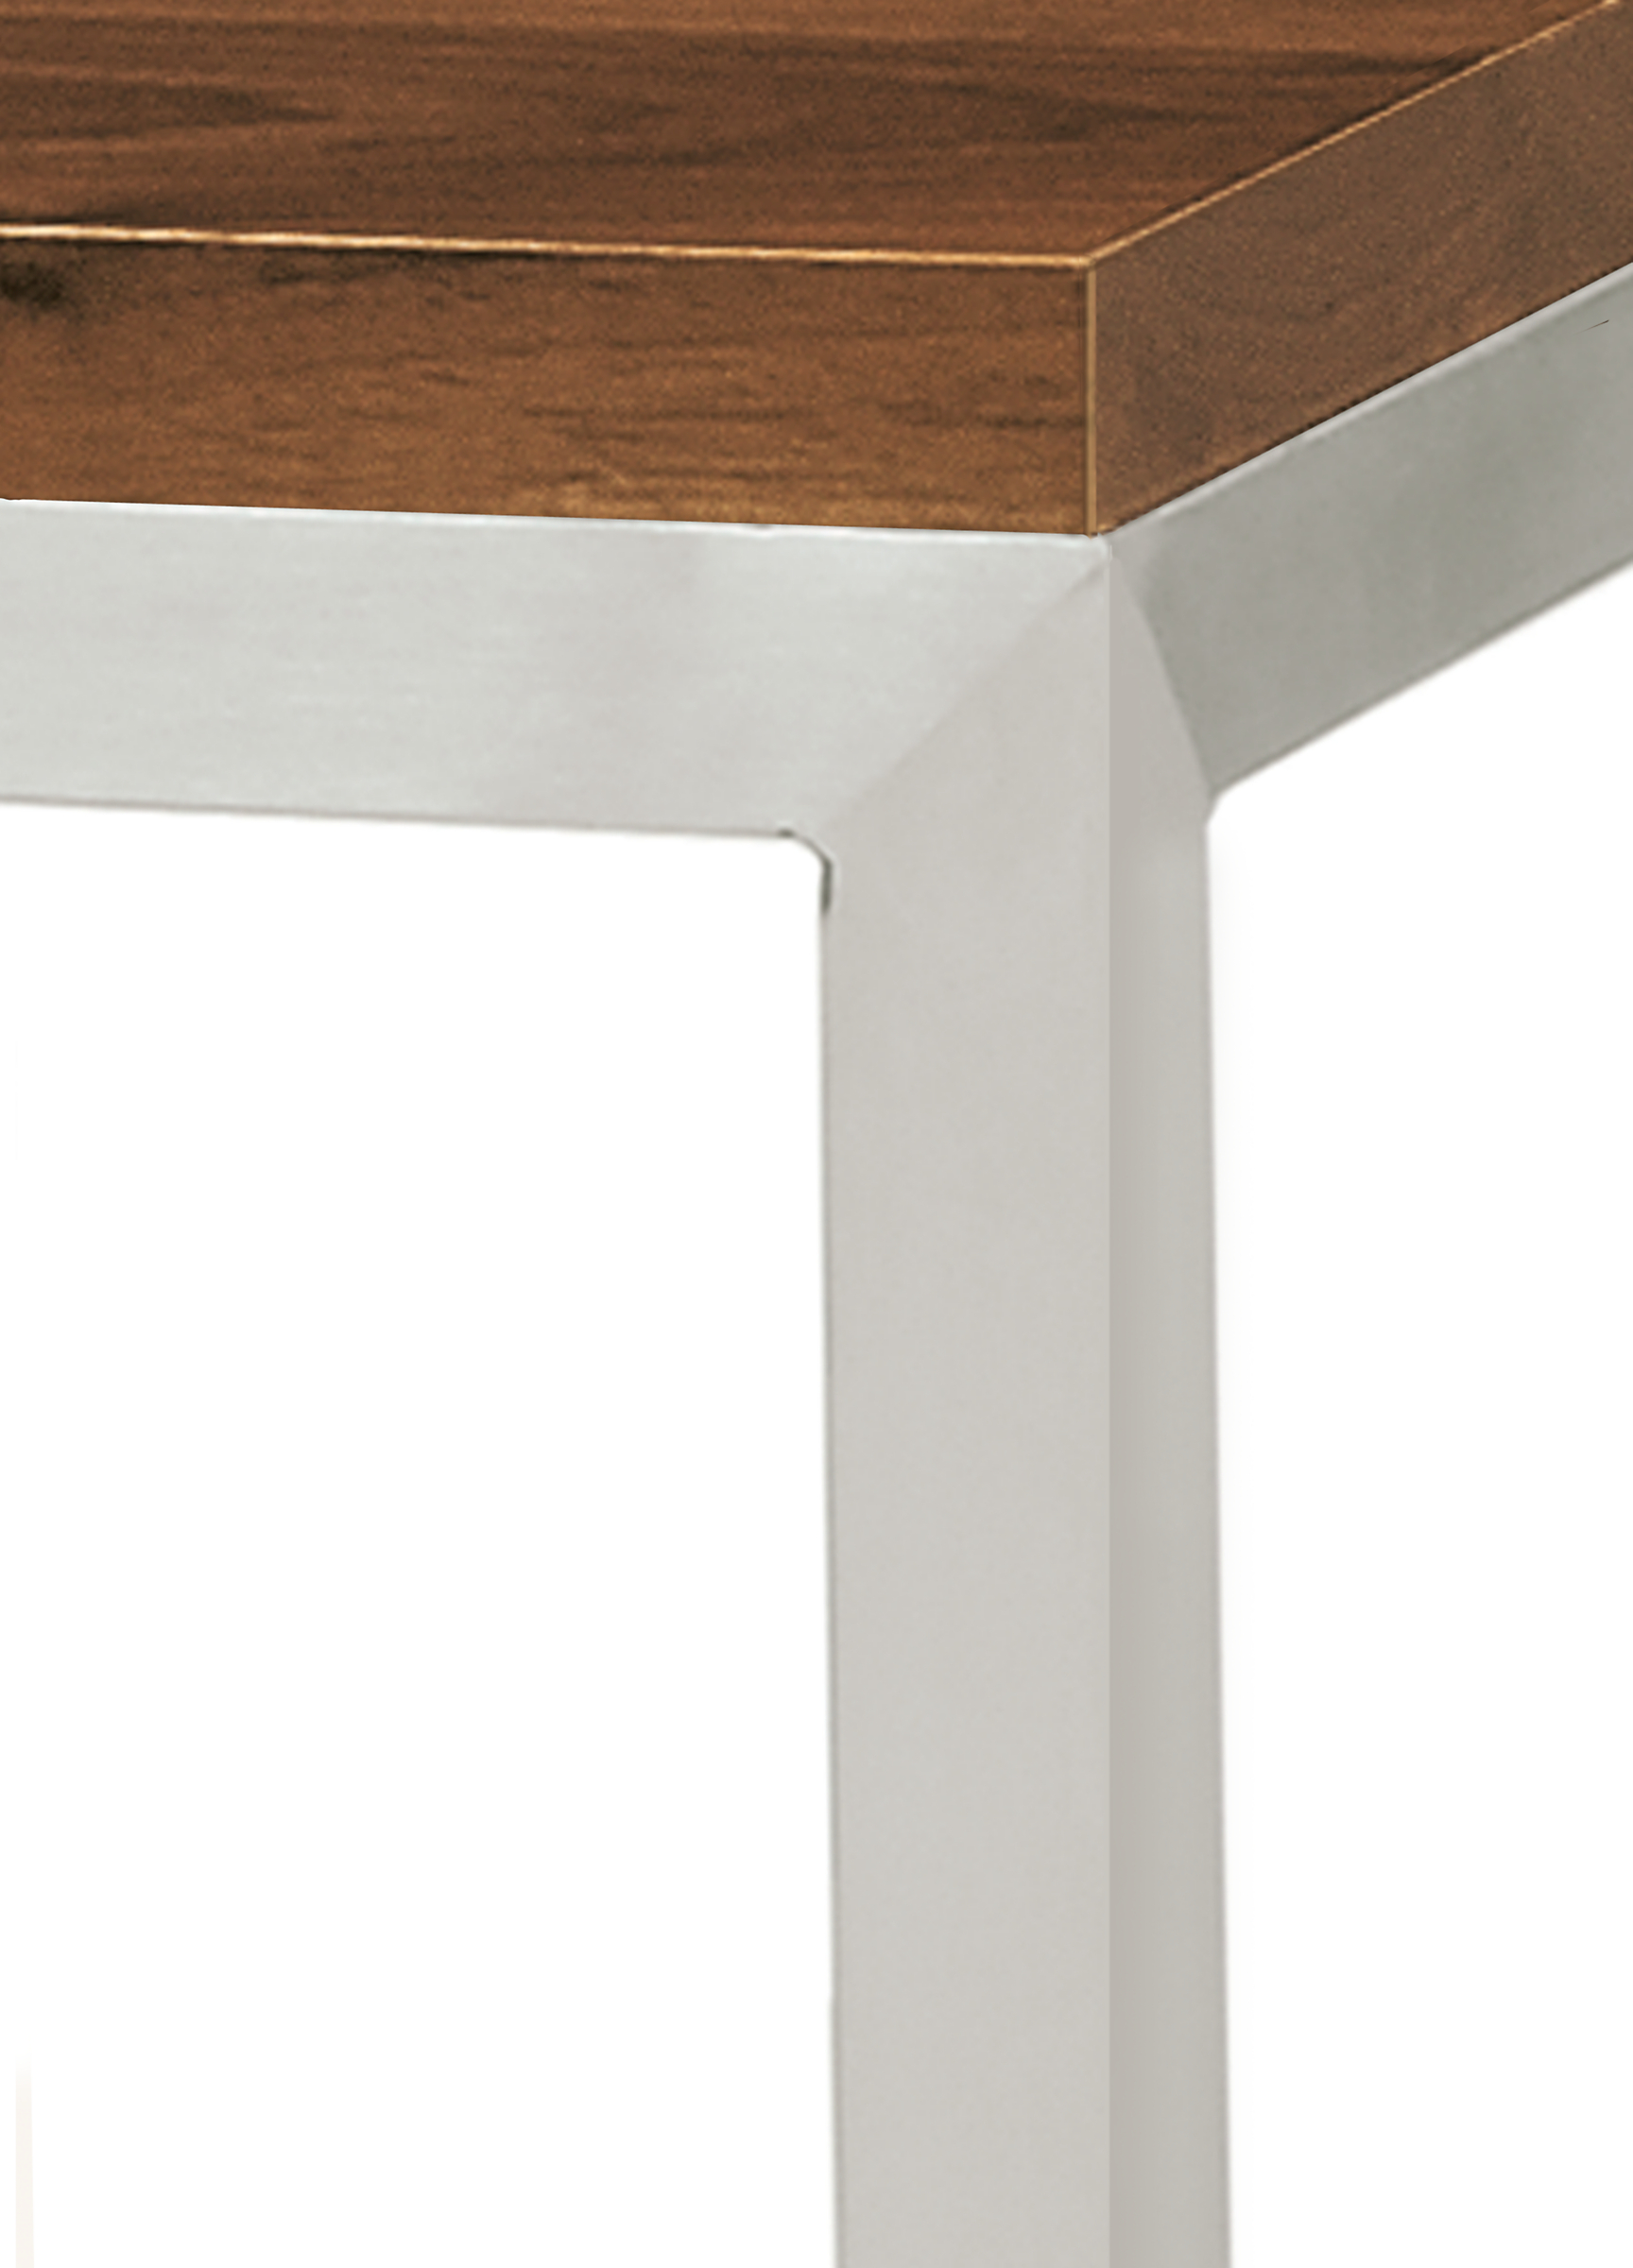 Detail of Parsons corner in Natural Steel and Glass.